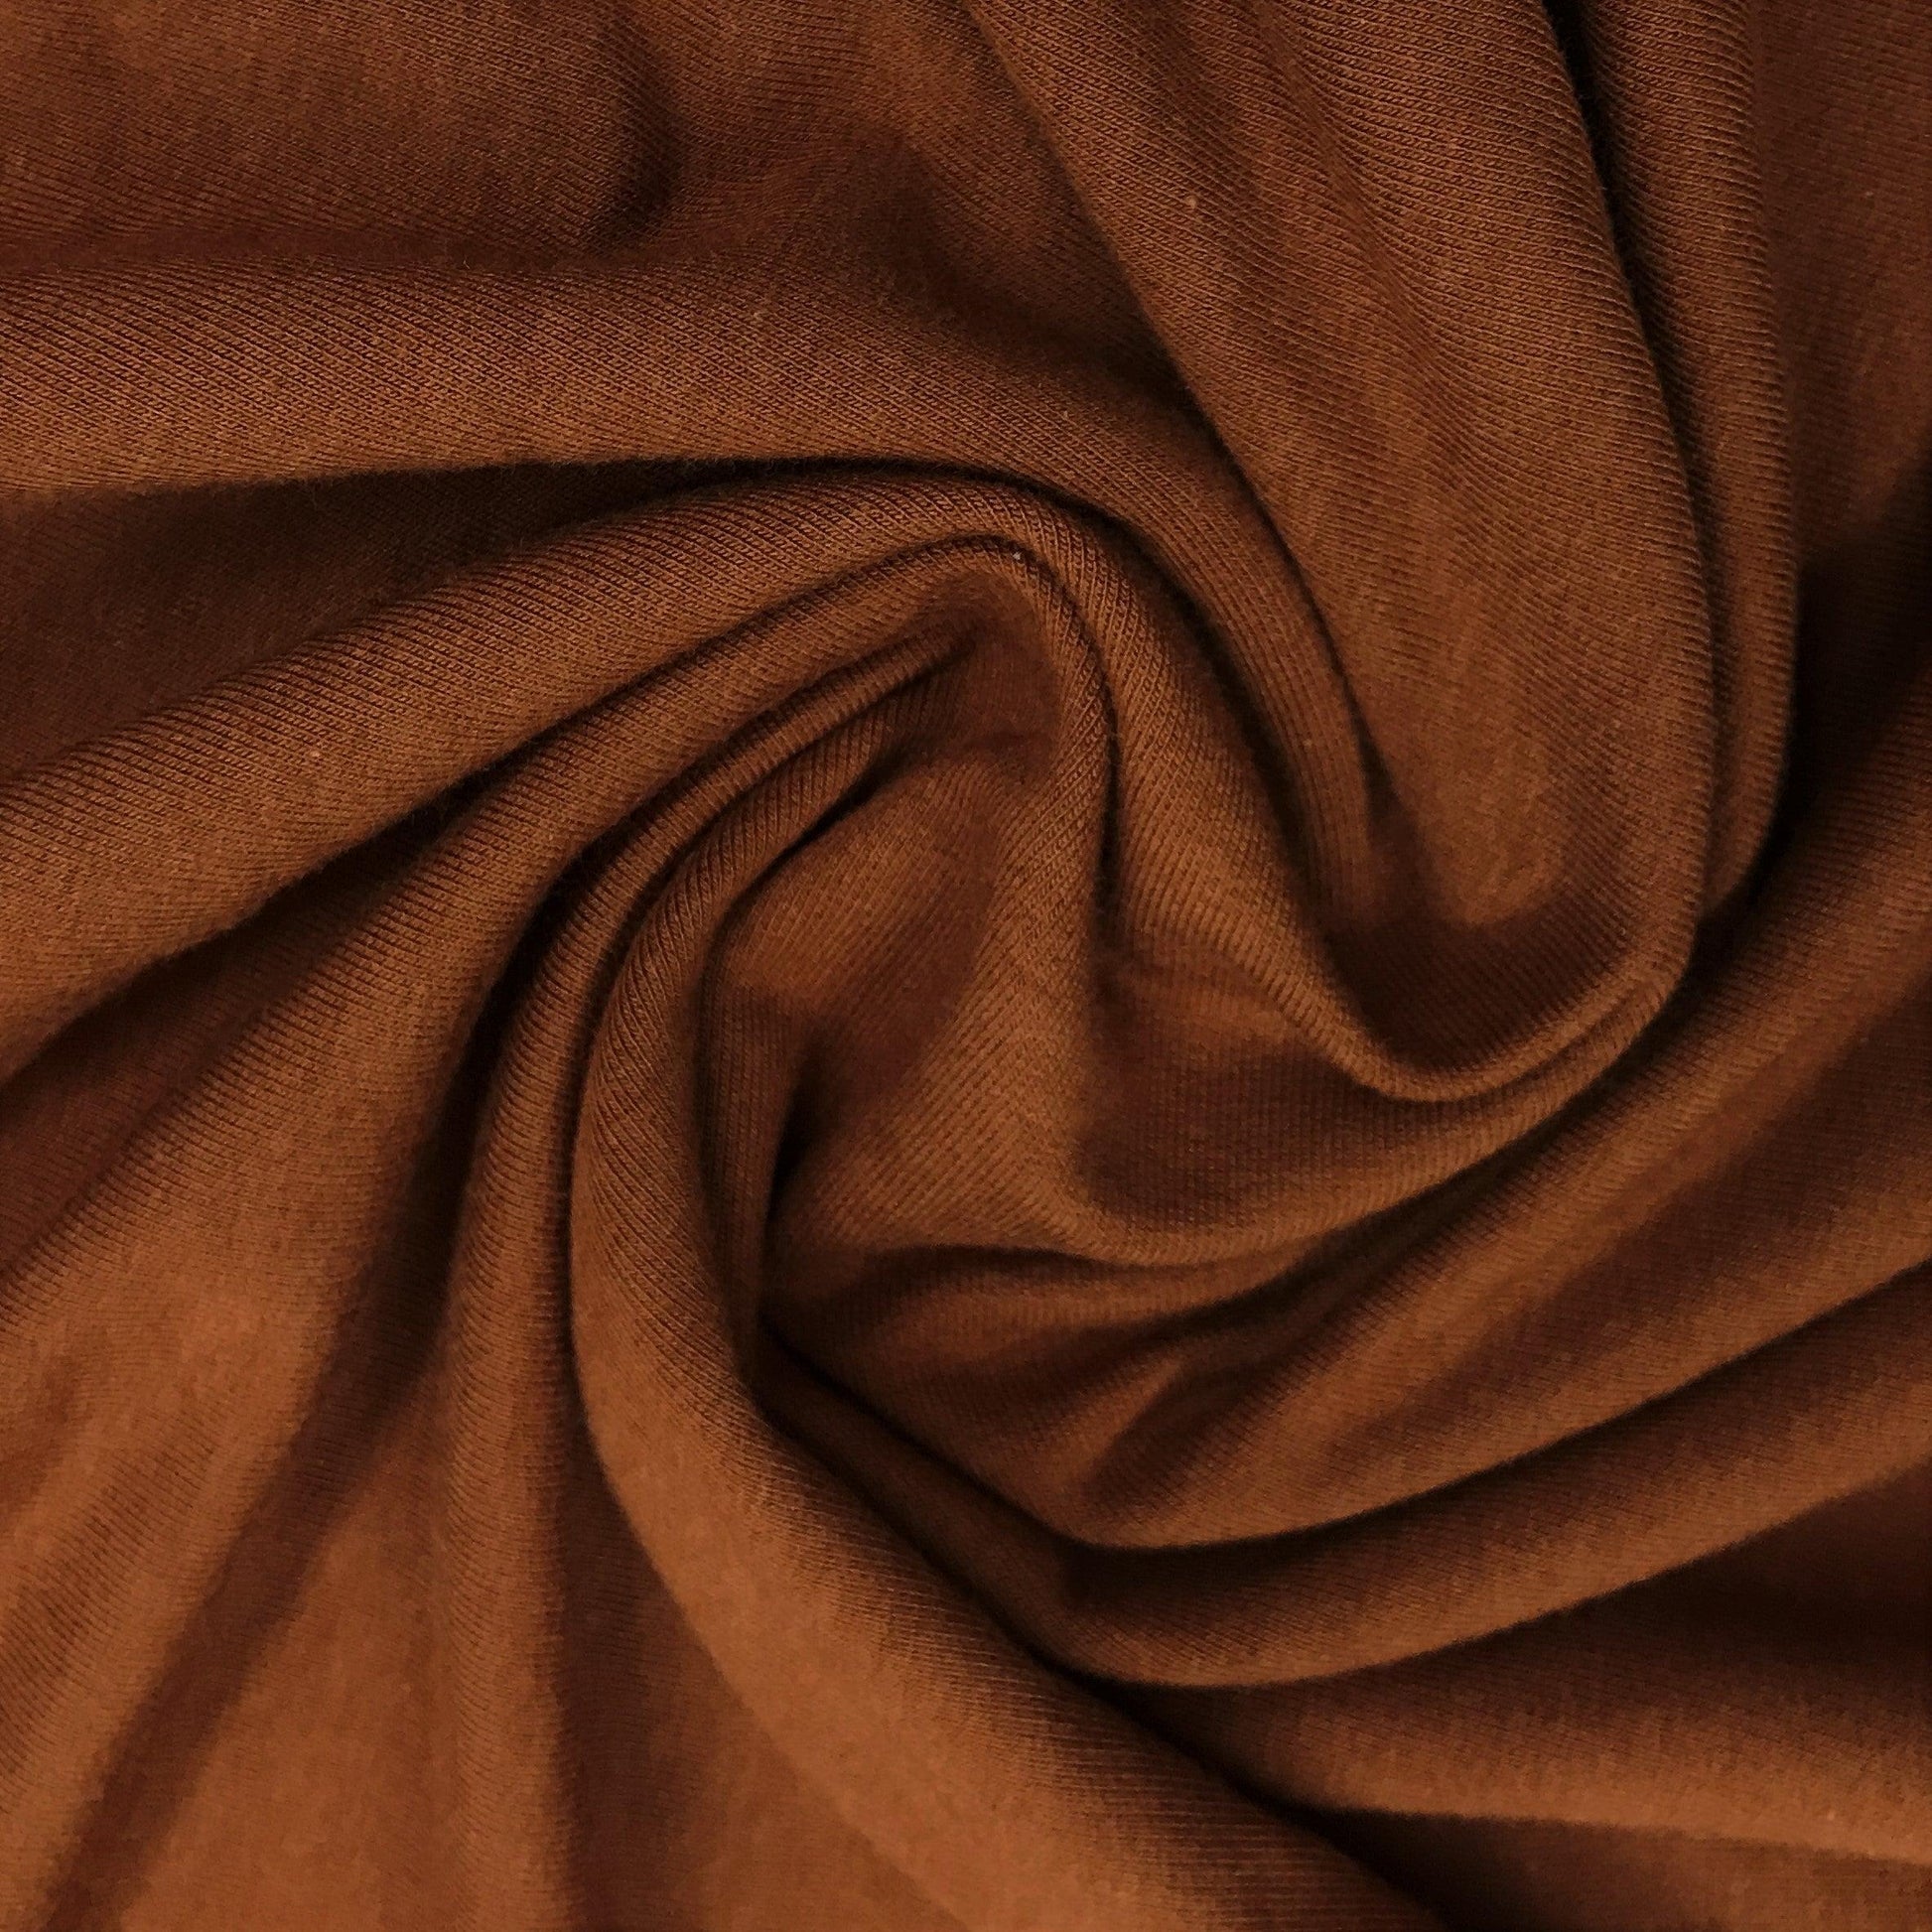 Rust Bamboo Stretch French Terry Fabric - 265 GSM, $10.86/yd - Rolls - Nature's Fabrics